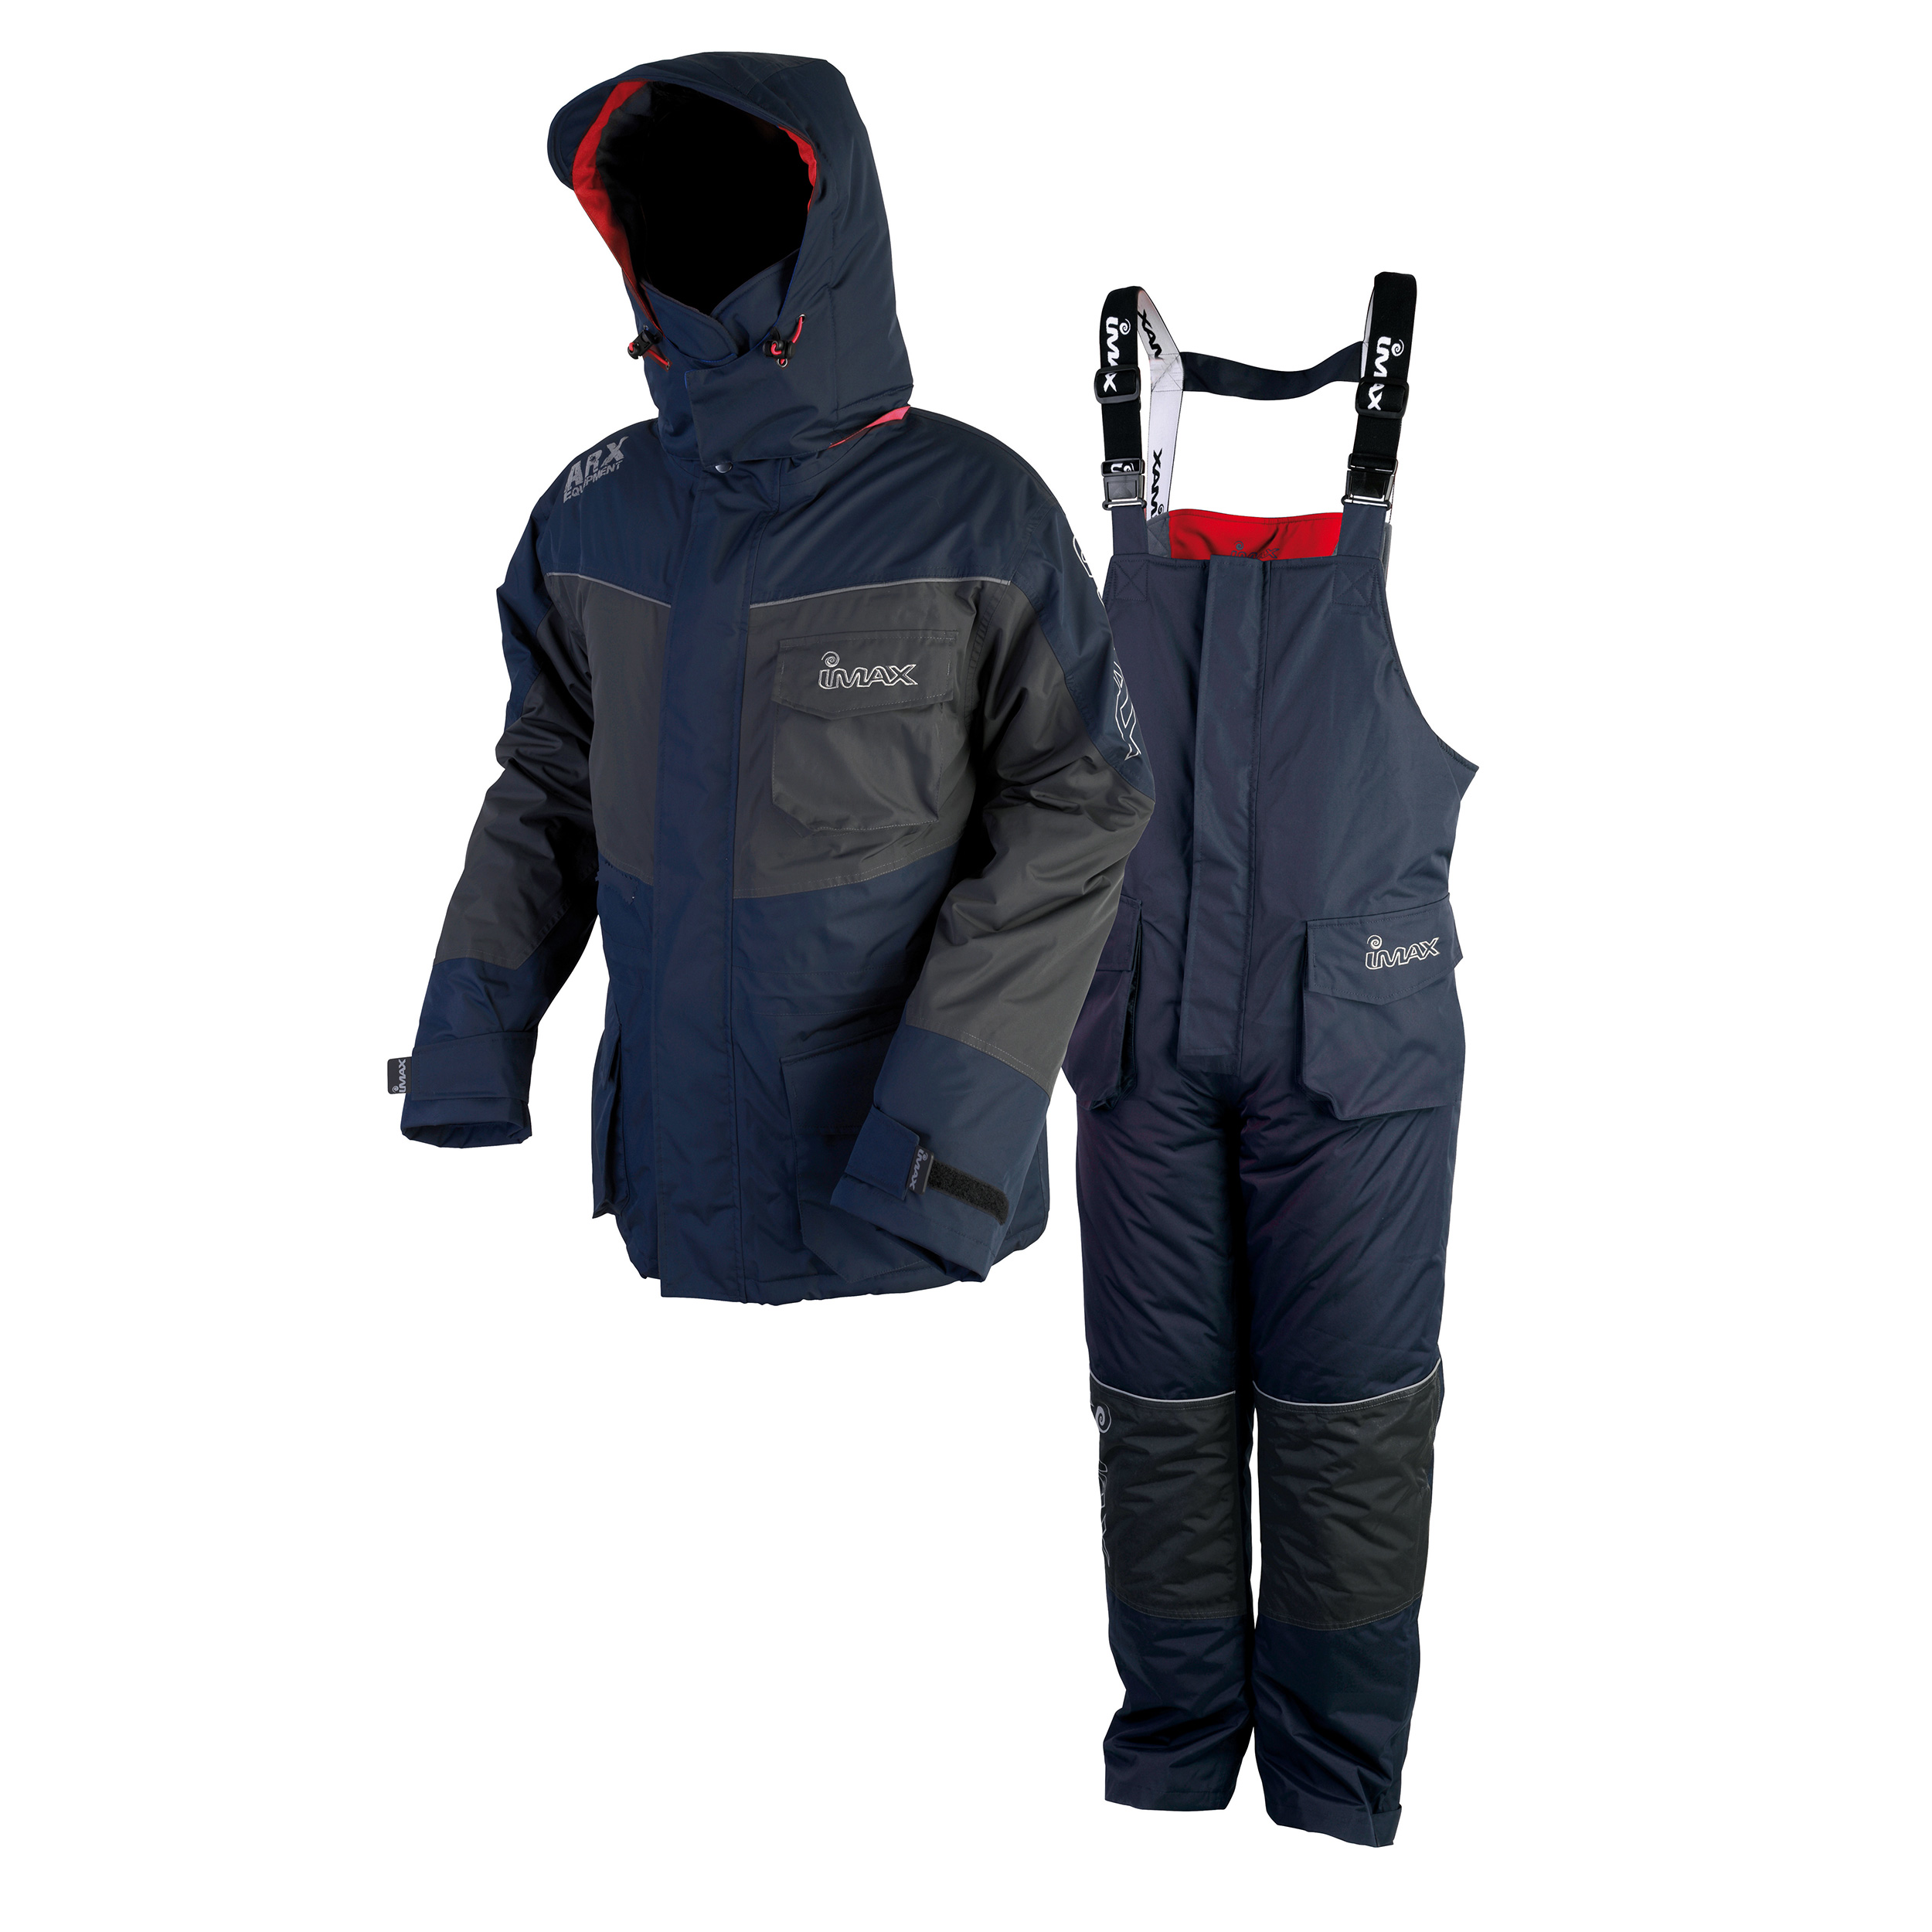 Imax ARX-20 ICE Thermo Suit Jacket and Trousers B&B M-XXXL 100% waterproof 